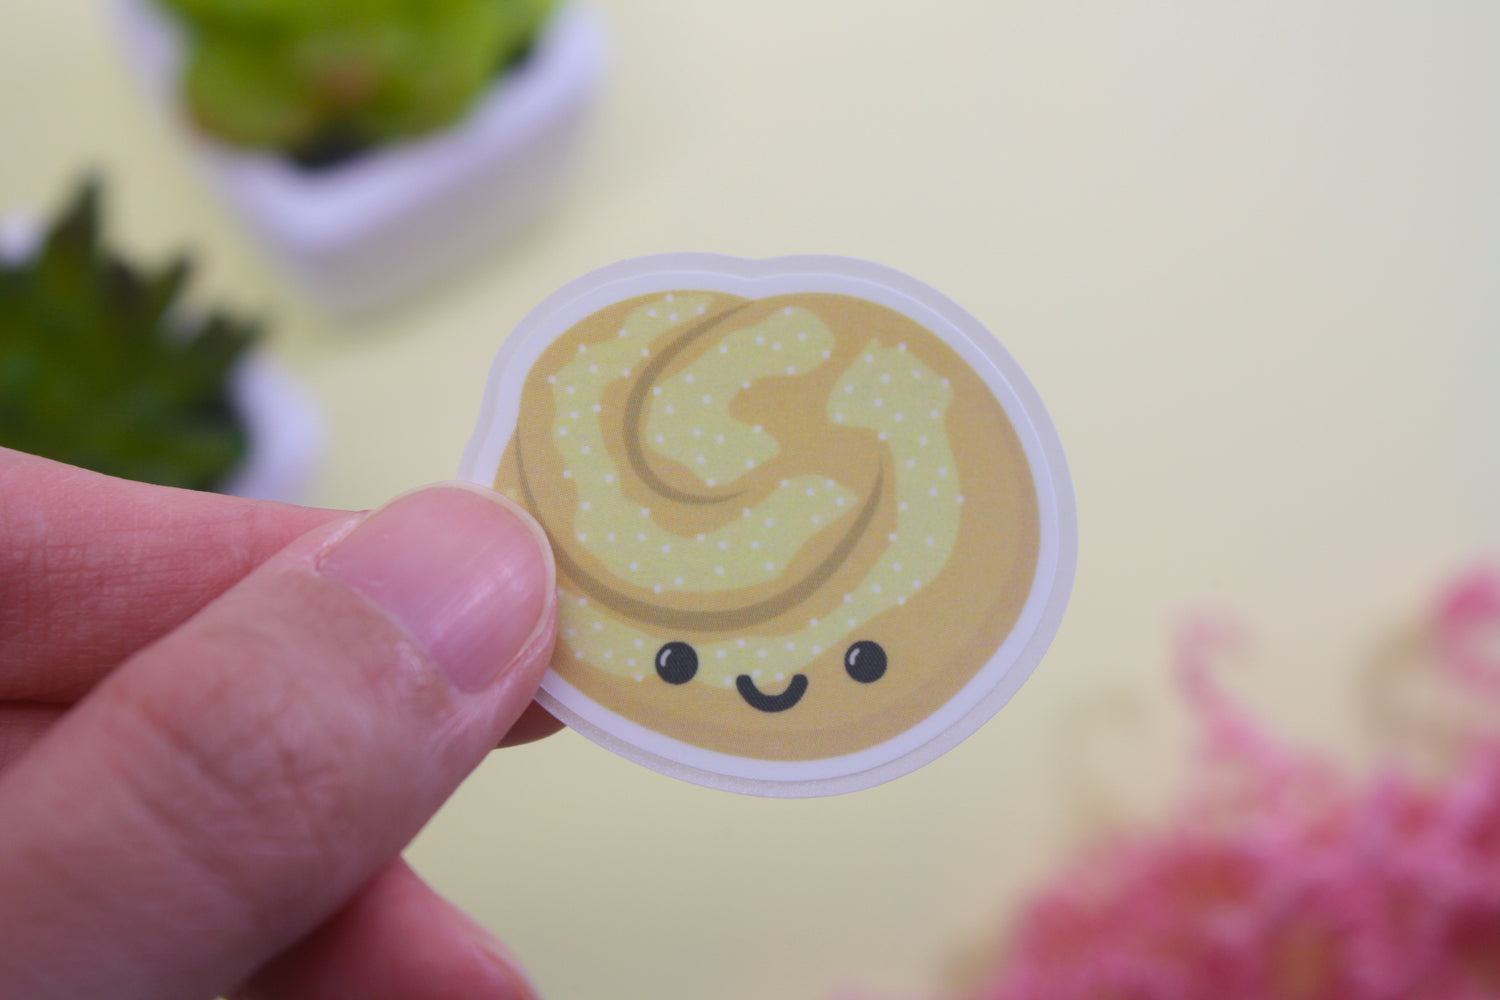 Food stickers